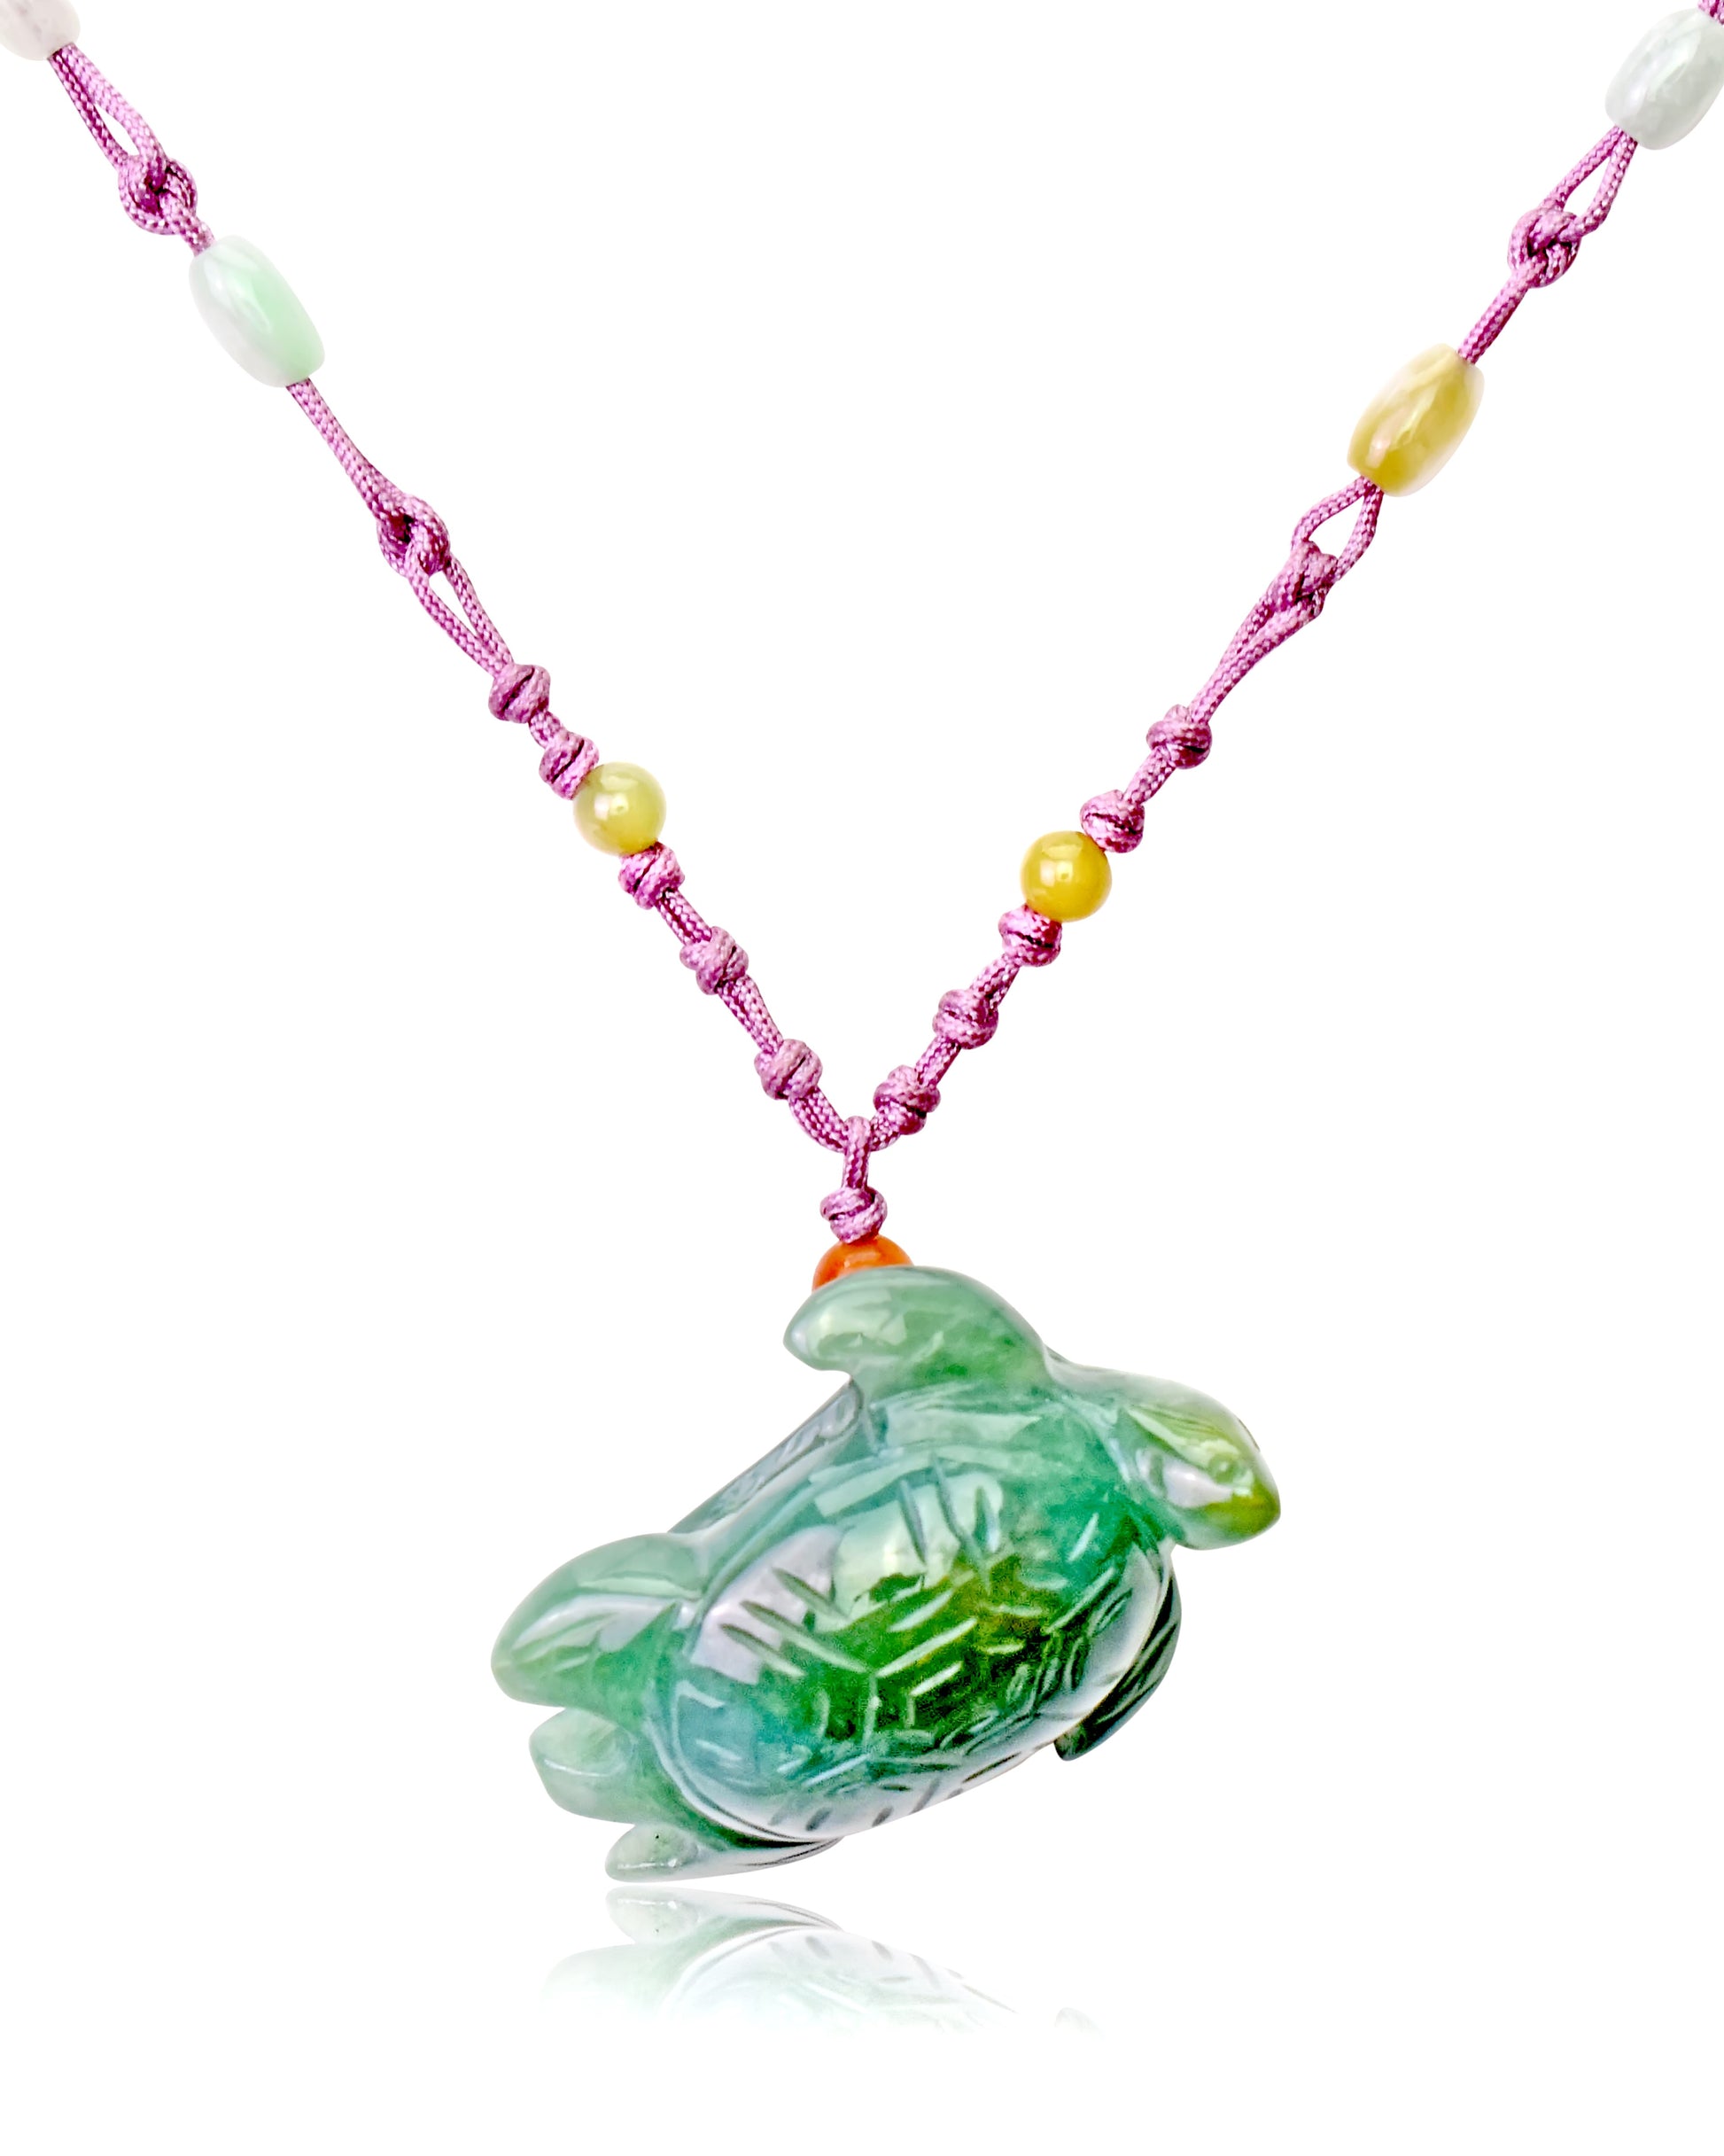 Get Good Luck and Spirituality with Turtle Jade Necklace made with Lavender Cord